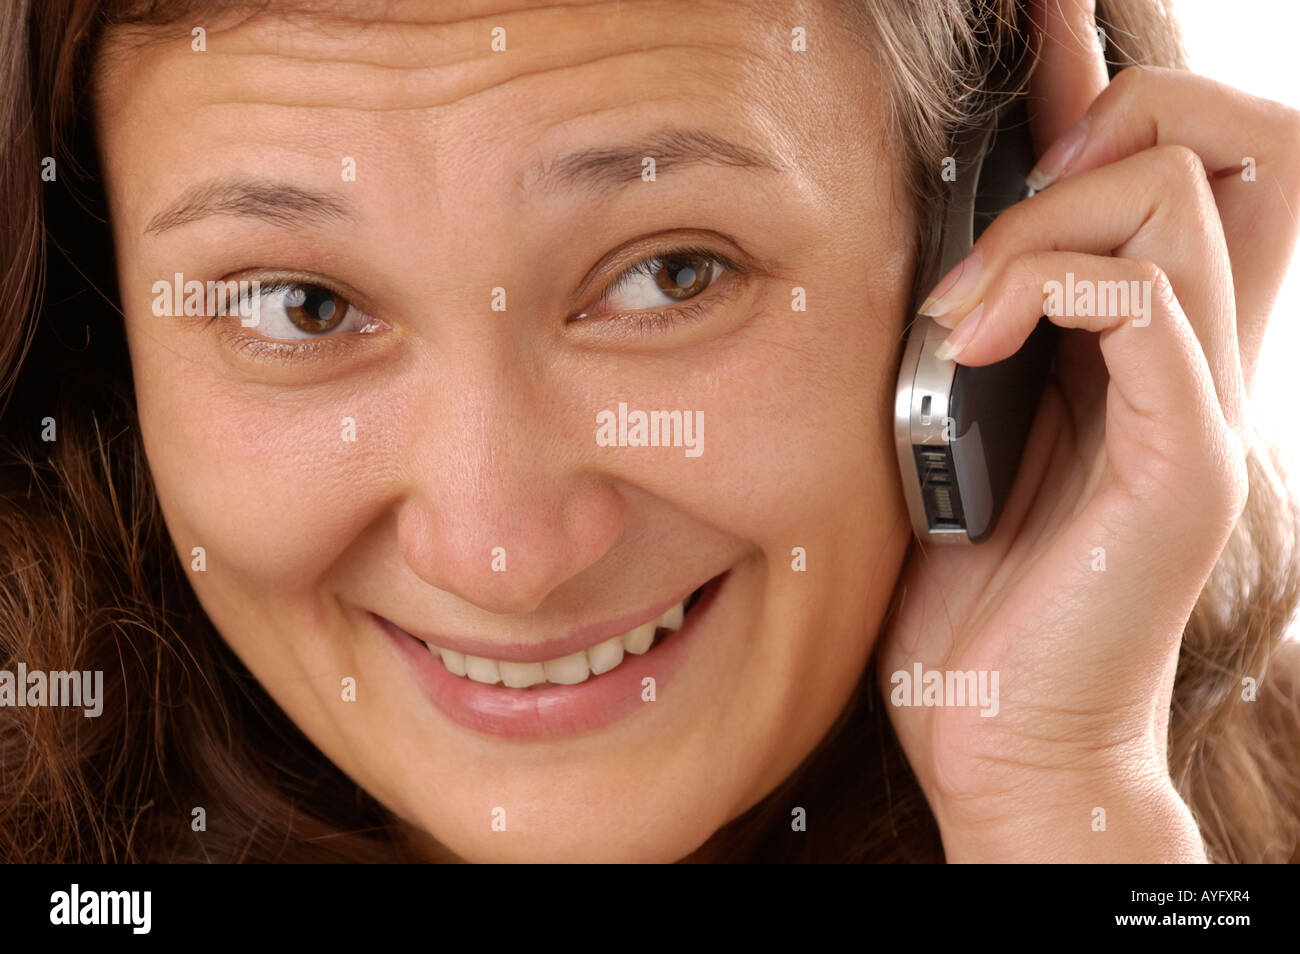 Smiling Woman talking on cell phone Banque D'Images